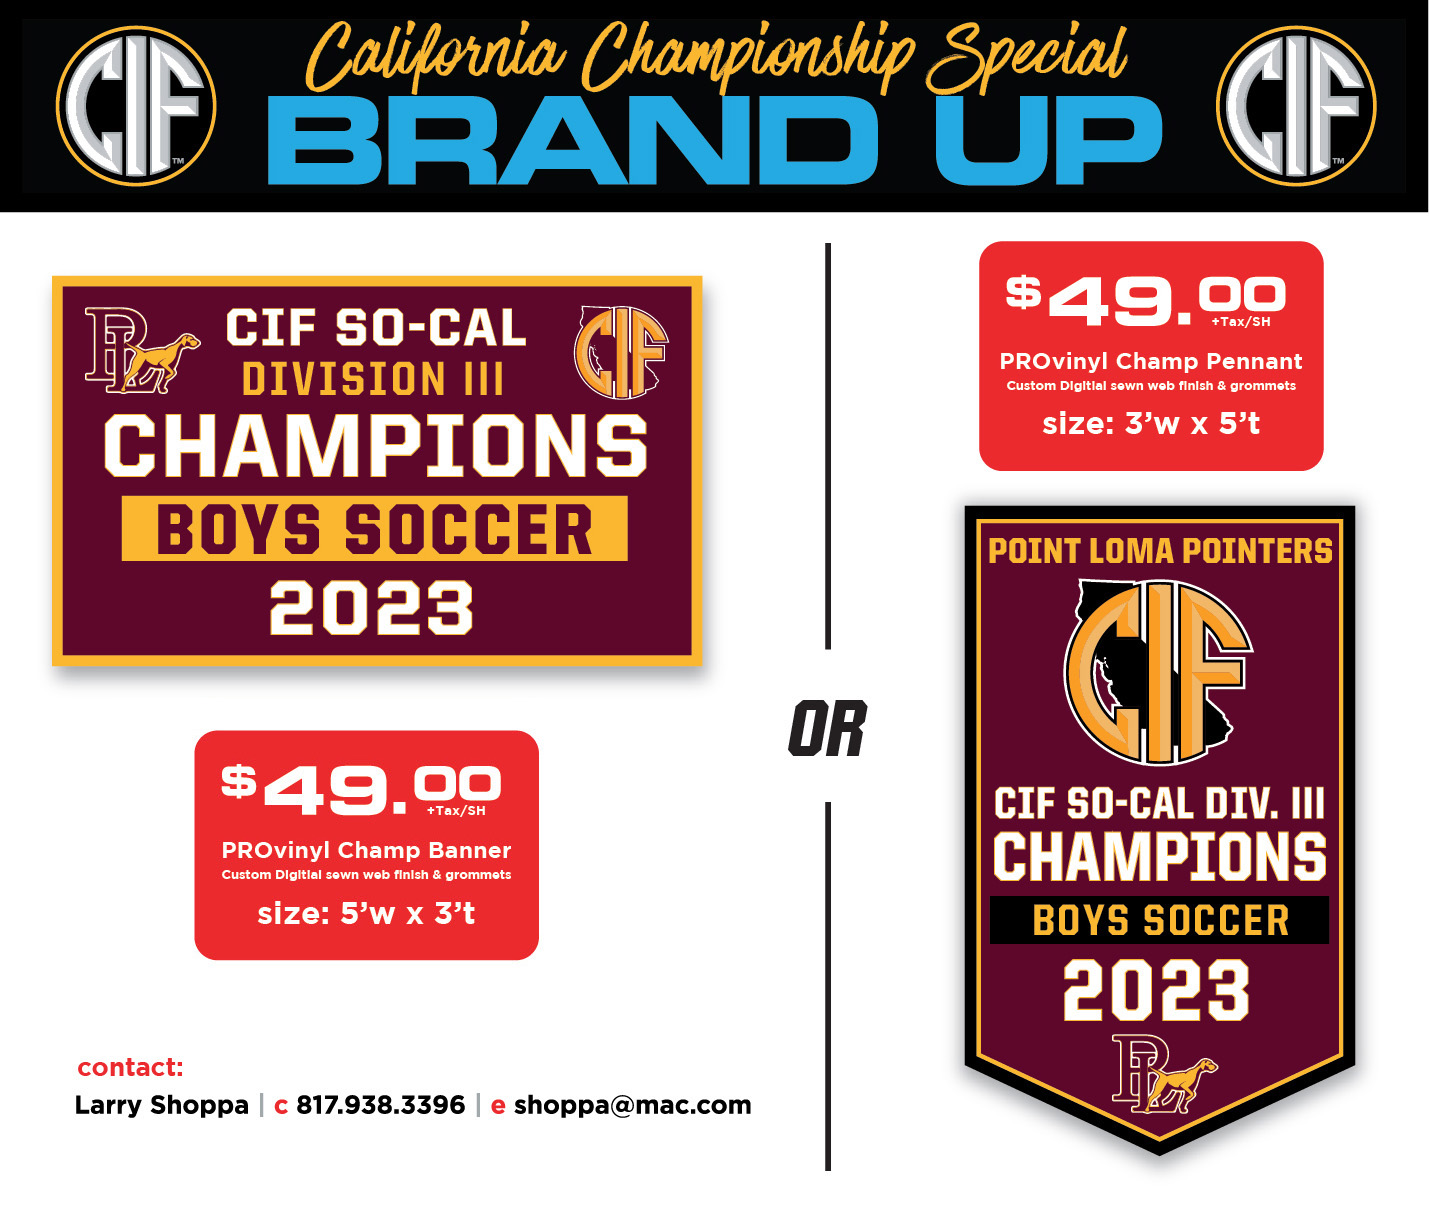 cif-championship-special-offer